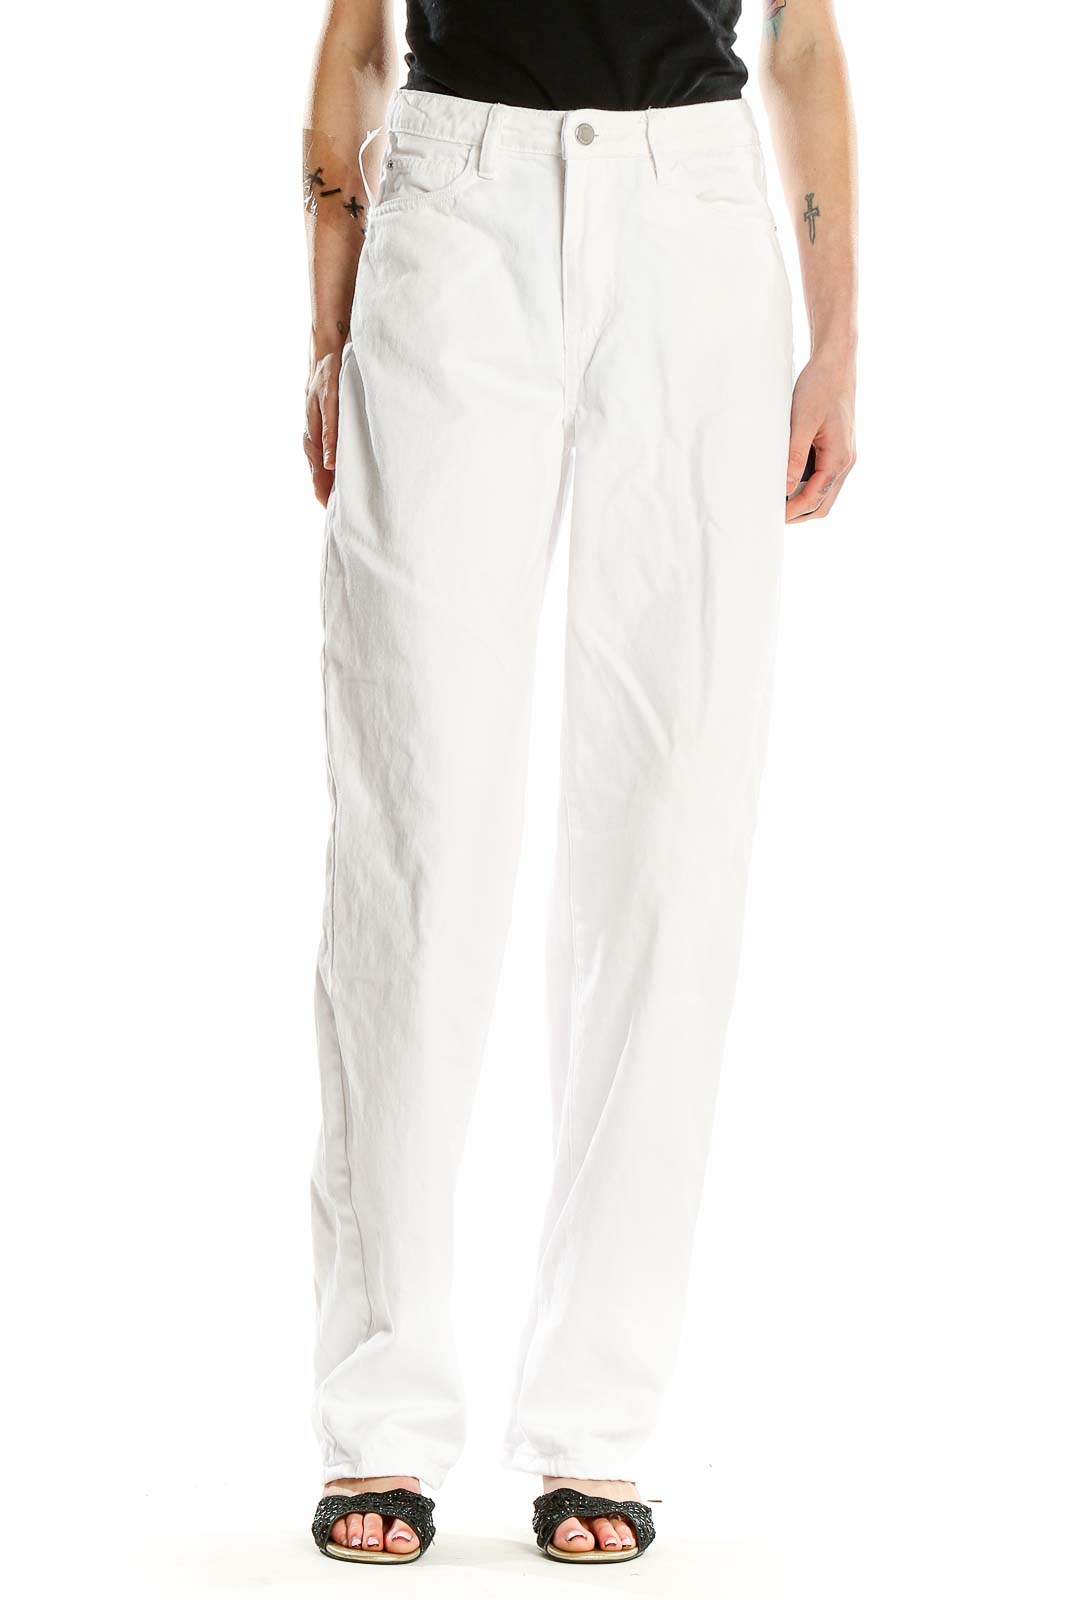 White High Waisted Straight Leg Jeans Front